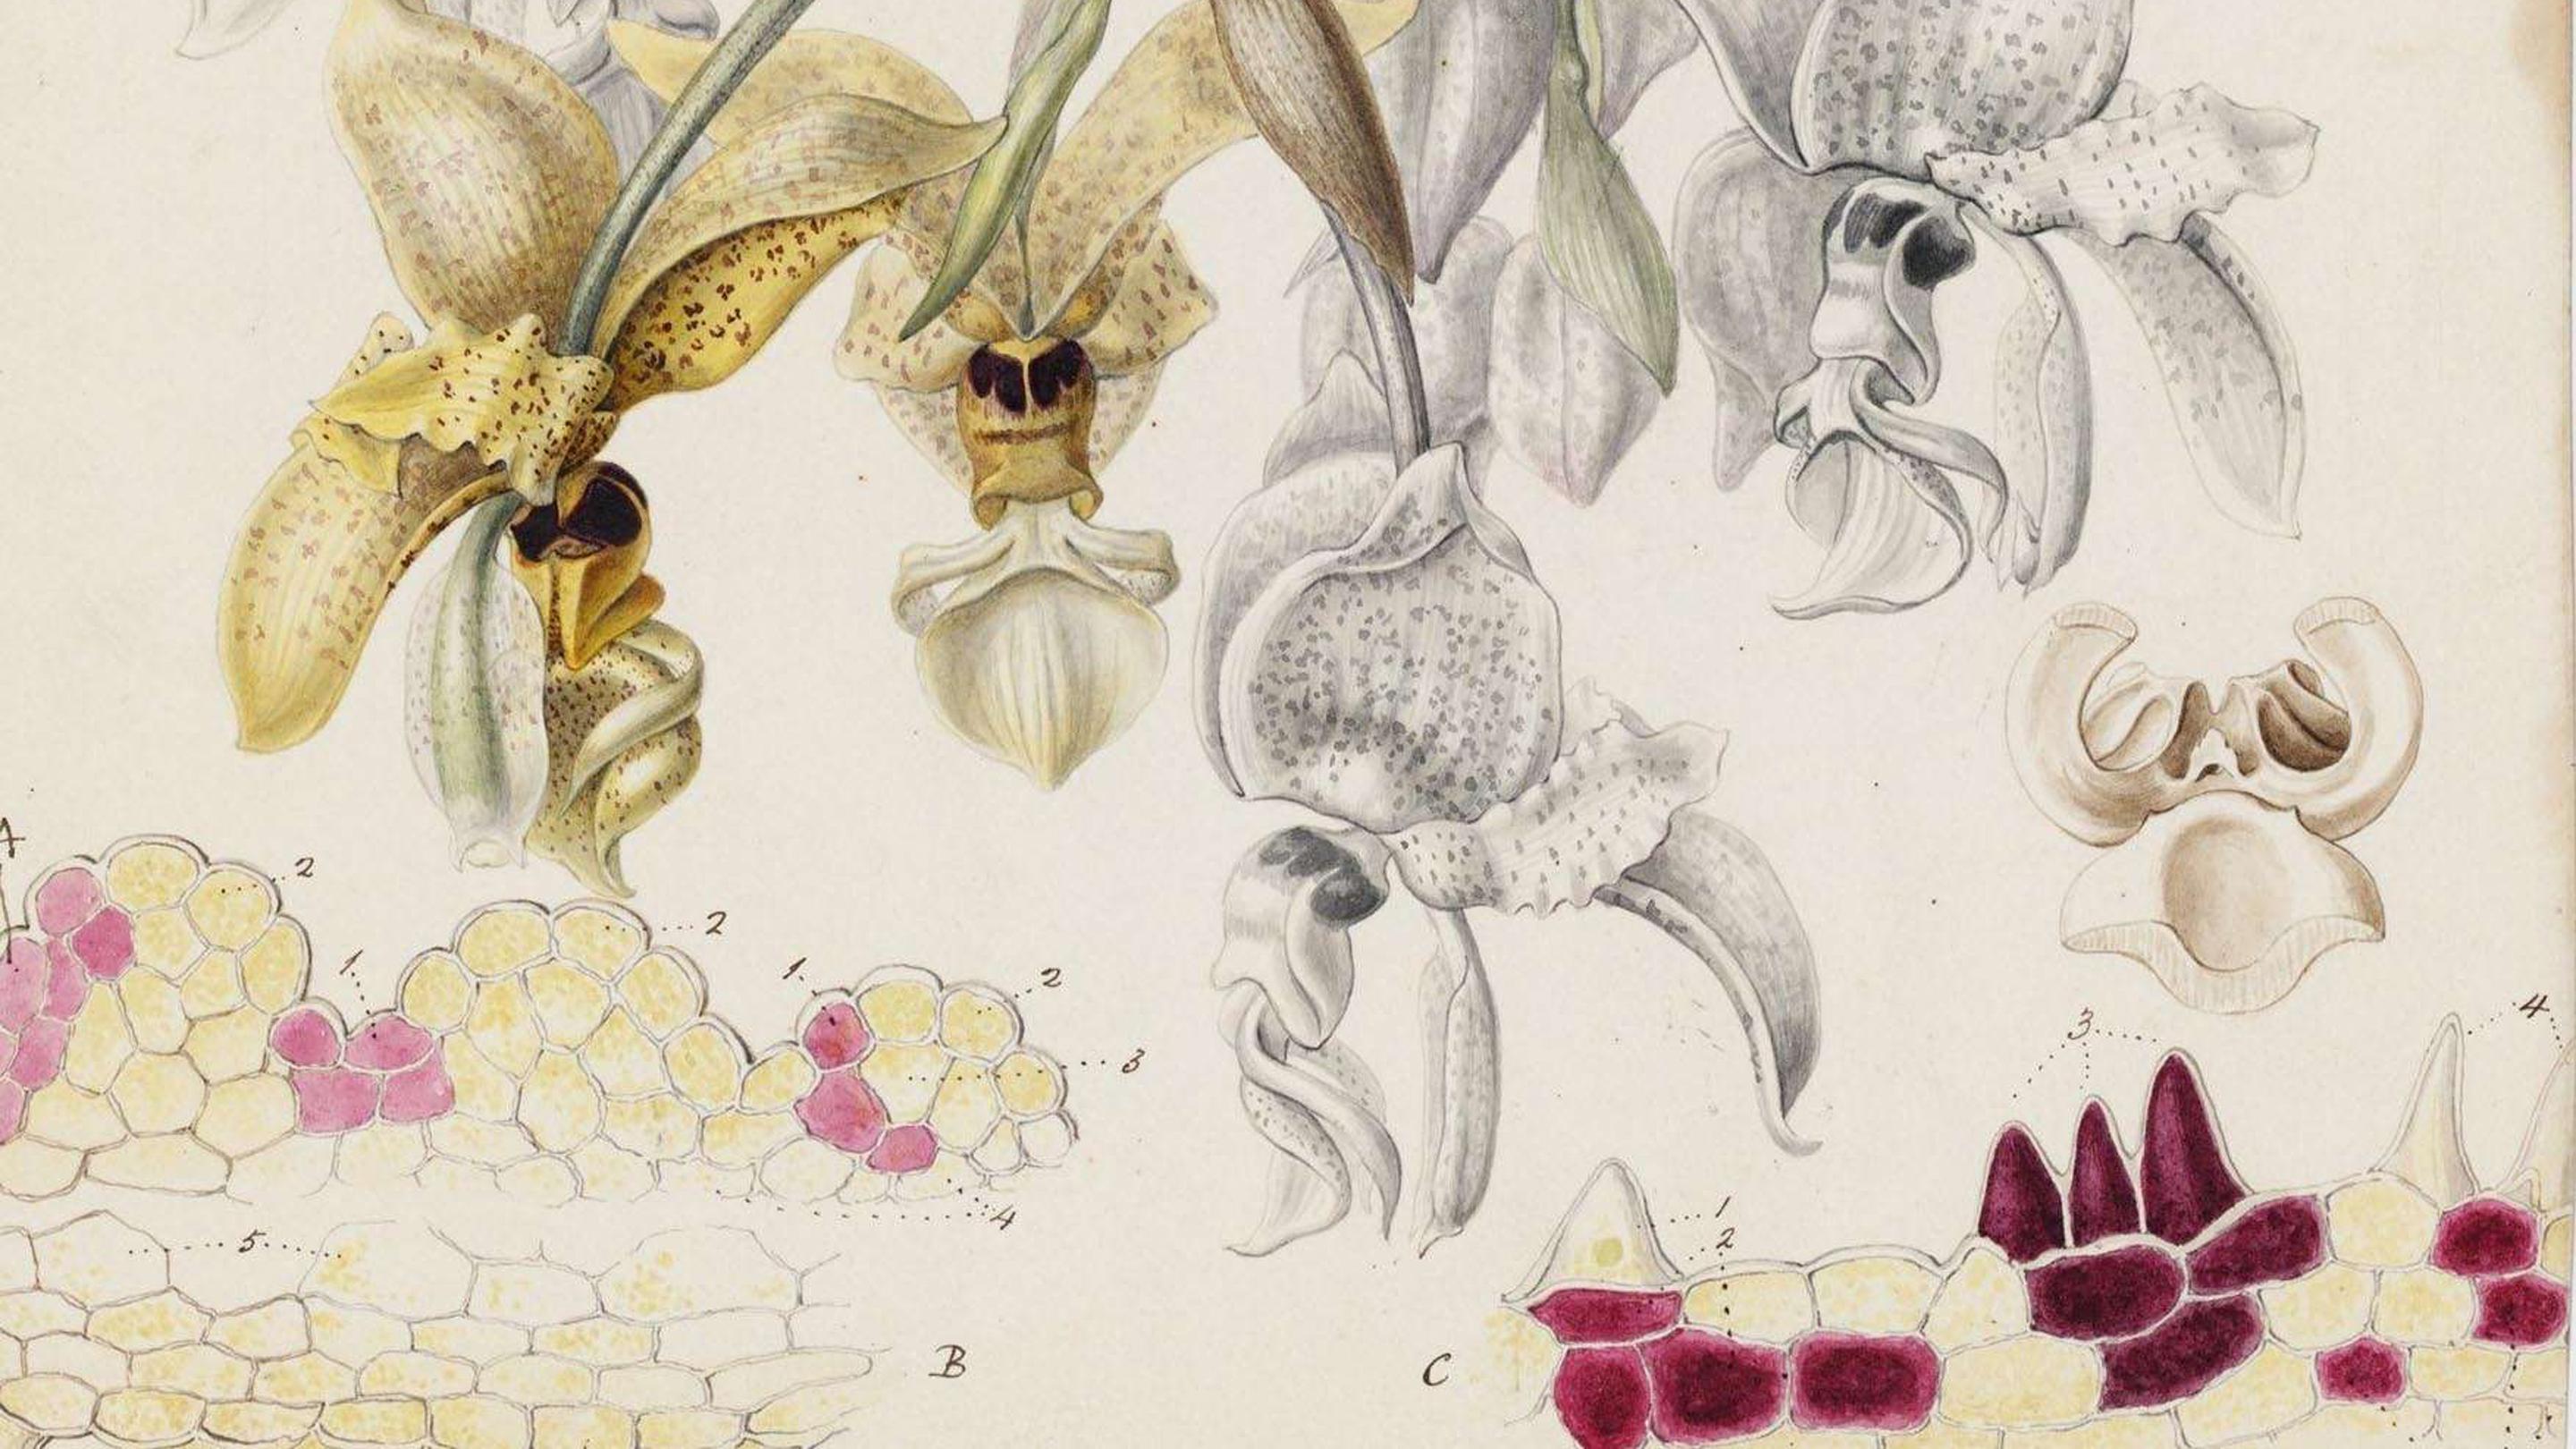 Illustration of orchid plant and flowers by Sarah Ann Drake